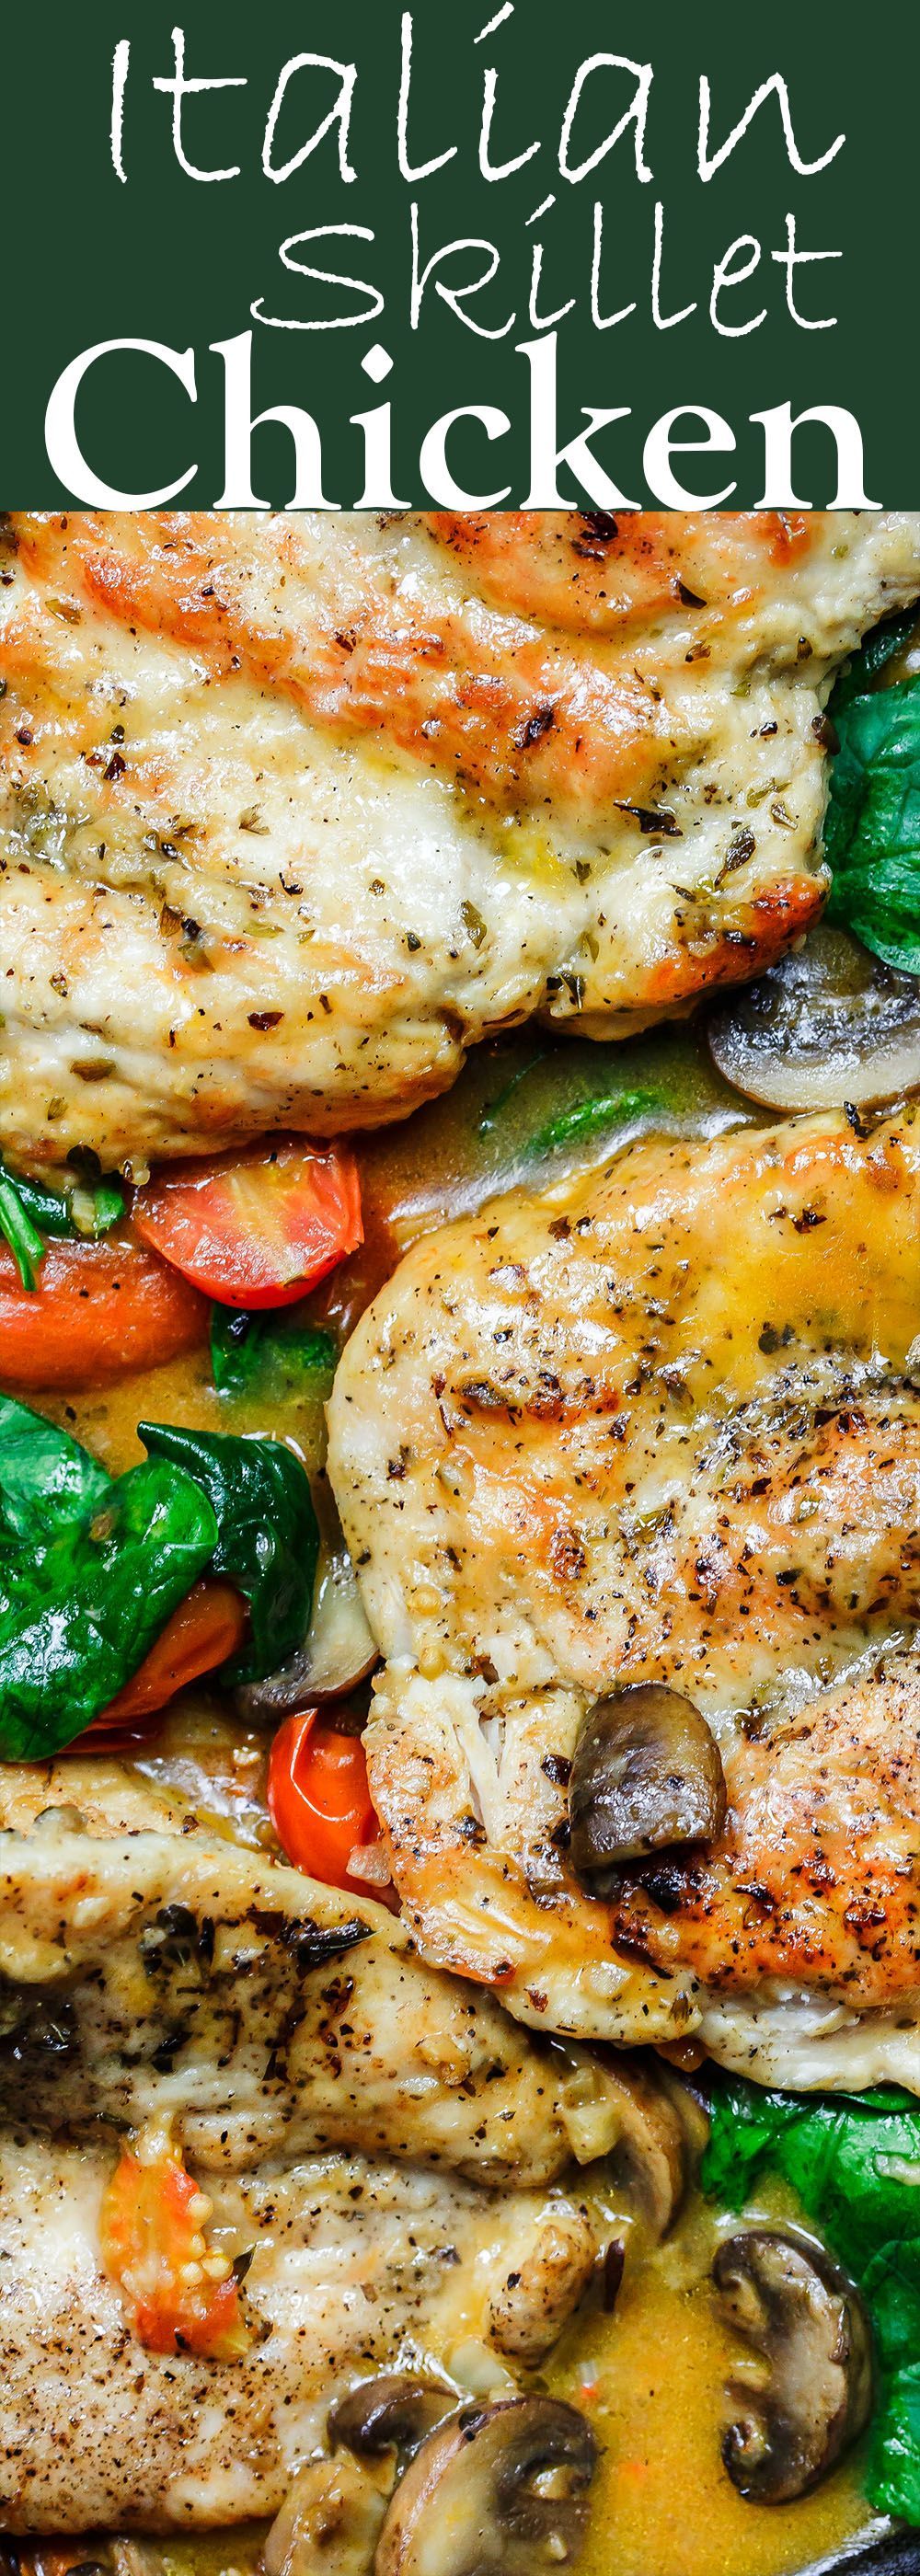 30-Minute Italian Skillet Chicken Recipe with Tomatoes and Mushrooms | The Mediterranean Dish. Flavor packed chicken breasts